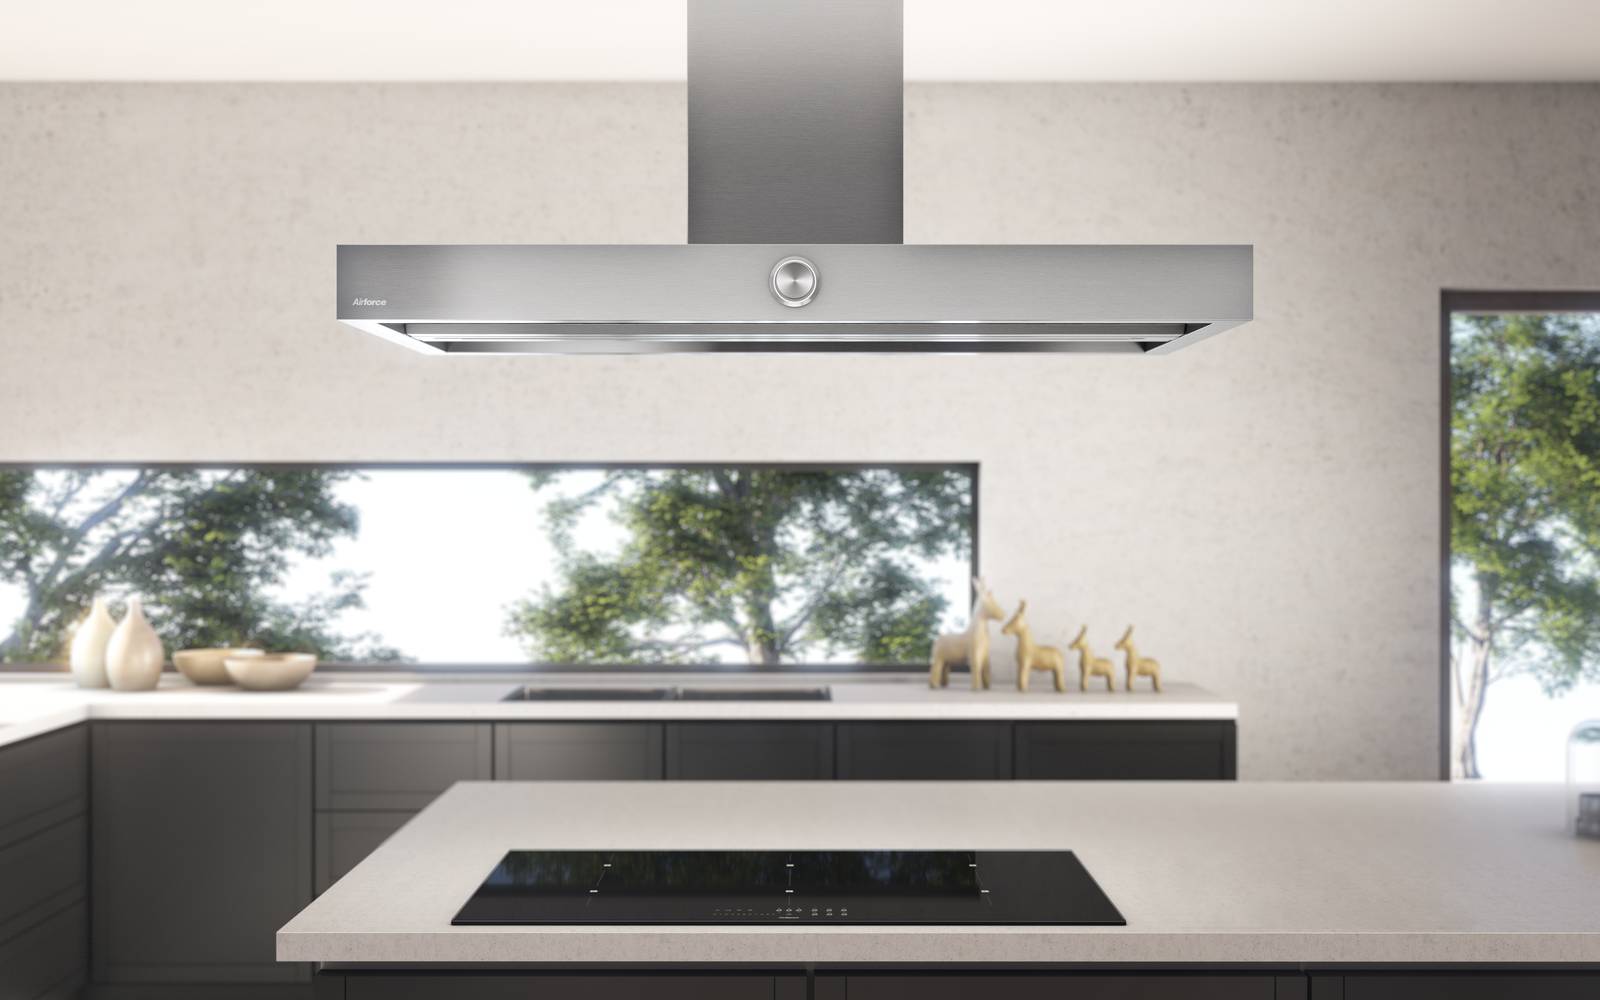 Airforce VIS BOXY Island 120cm Stainless Steel Cooker hood with Rotary Dial Control Integra ready